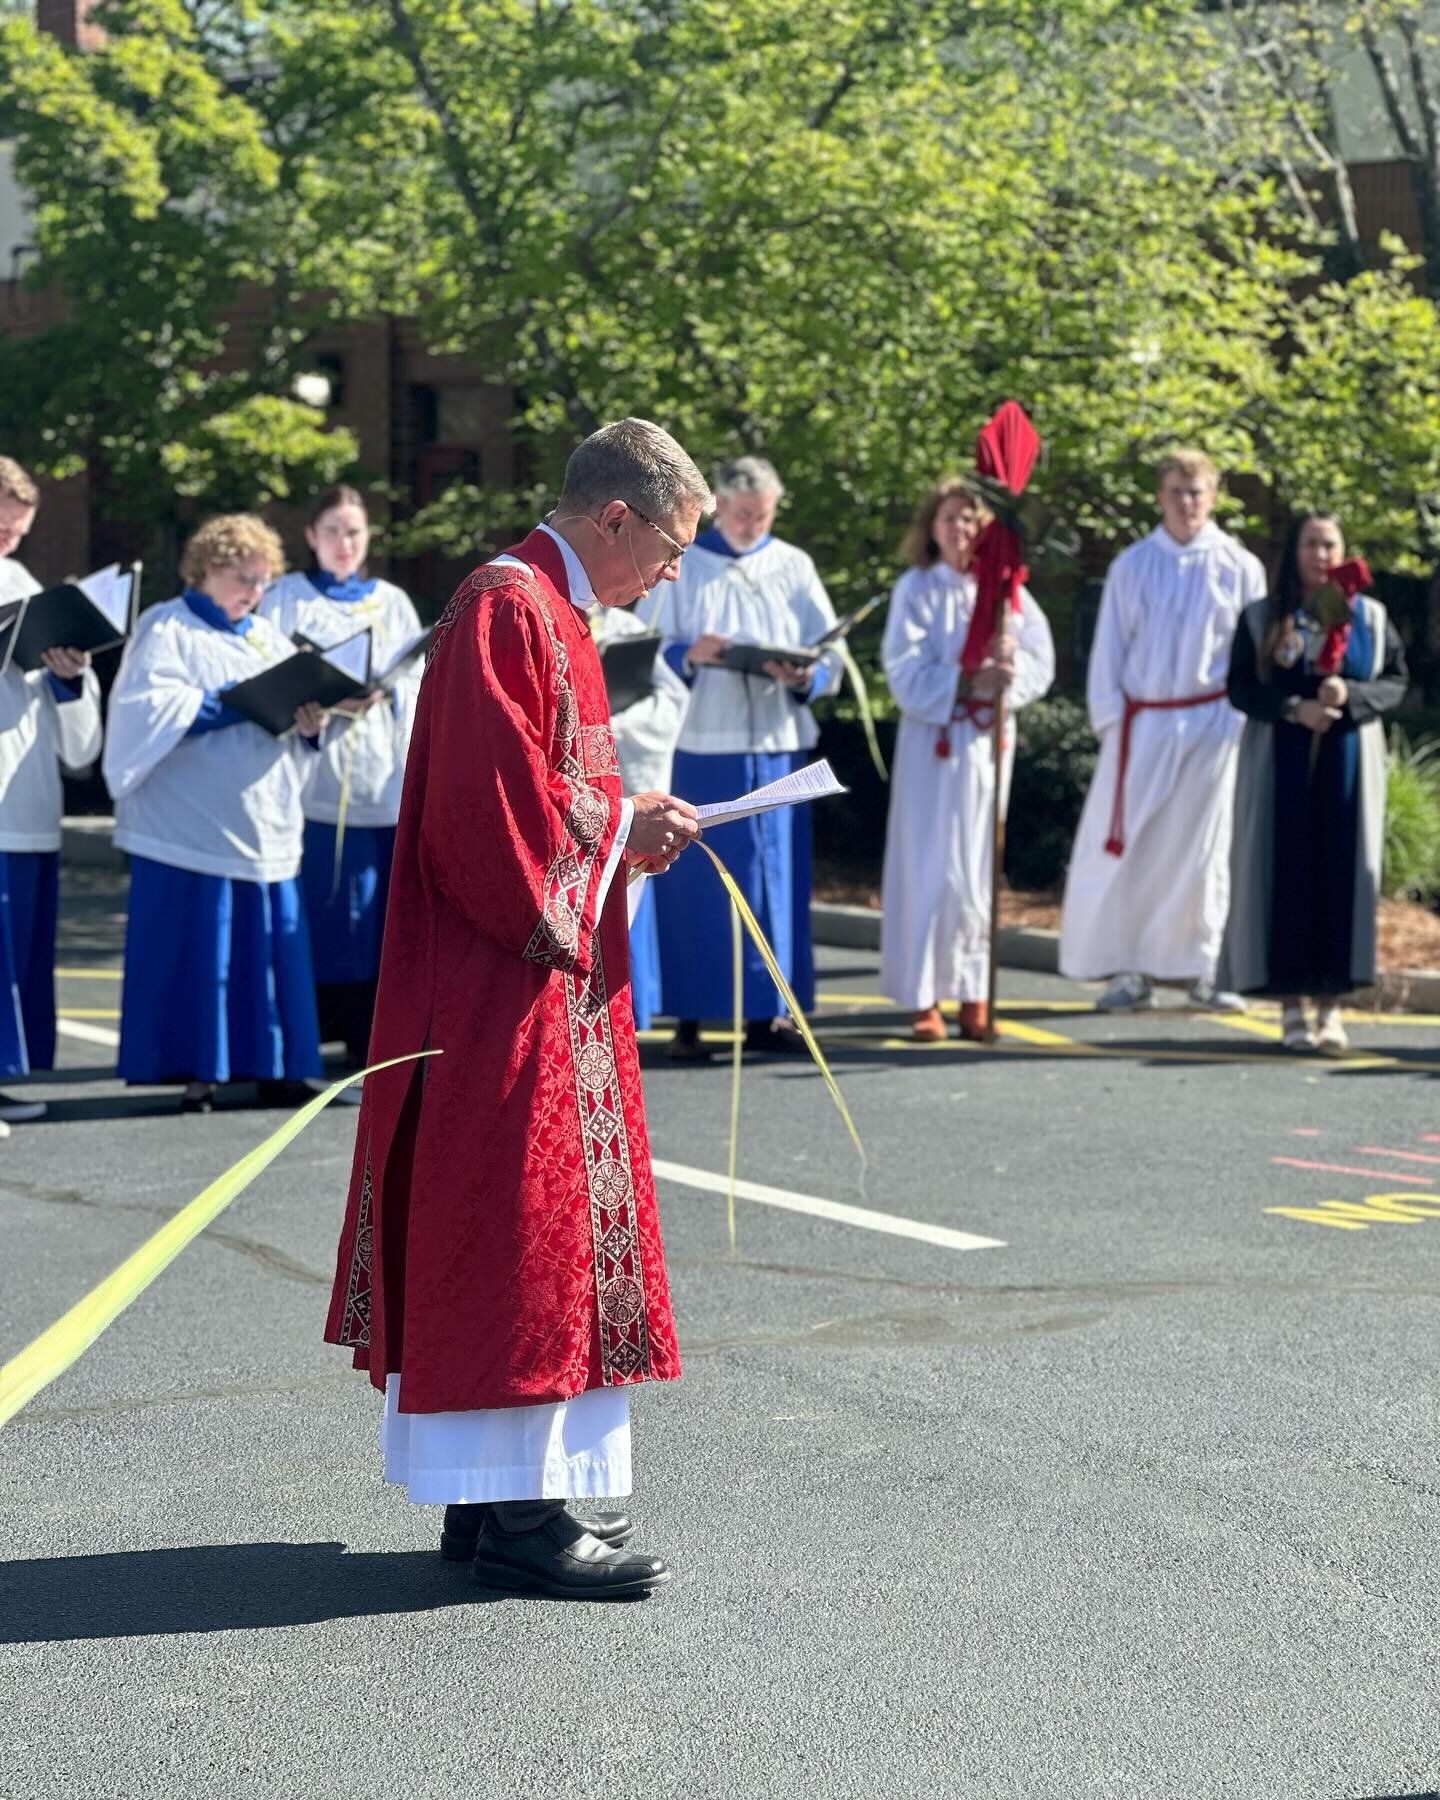 Palm Sunday was a morning full of worship and fellowship at St. Martin&rsquo;s, making for a joyous start to Holy Week. 

We hope you&rsquo;ll join us this week for the following services leading up to Easter: 

- Maundy Thursday, March 28, at 7:00 p